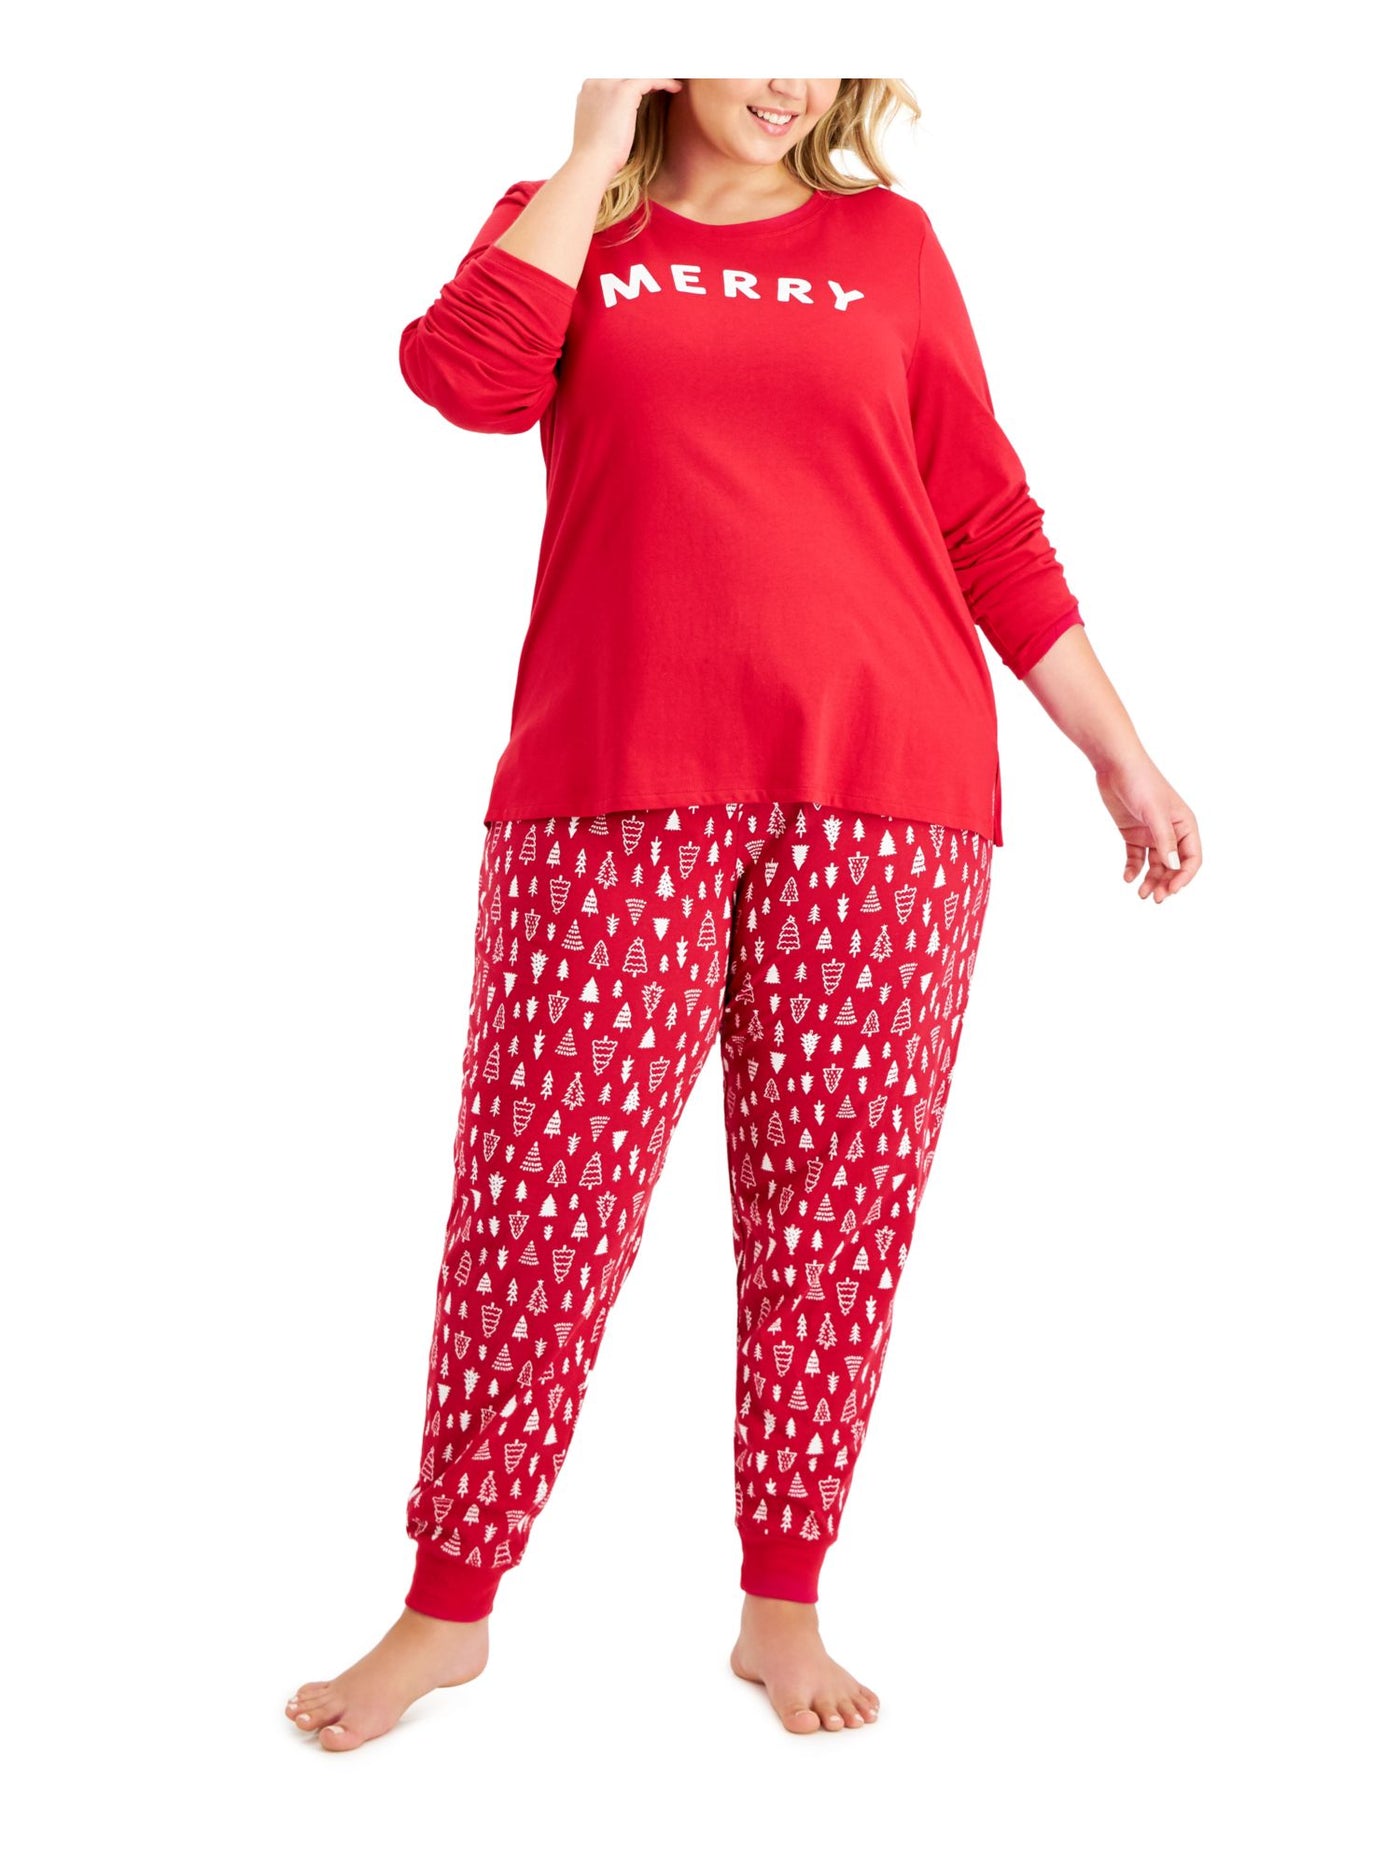 FAMILY PJs Womens Red Graphic Elastic Band Long Sleeve T-Shirt Top Cuffed Pants Pajamas Plus 1X